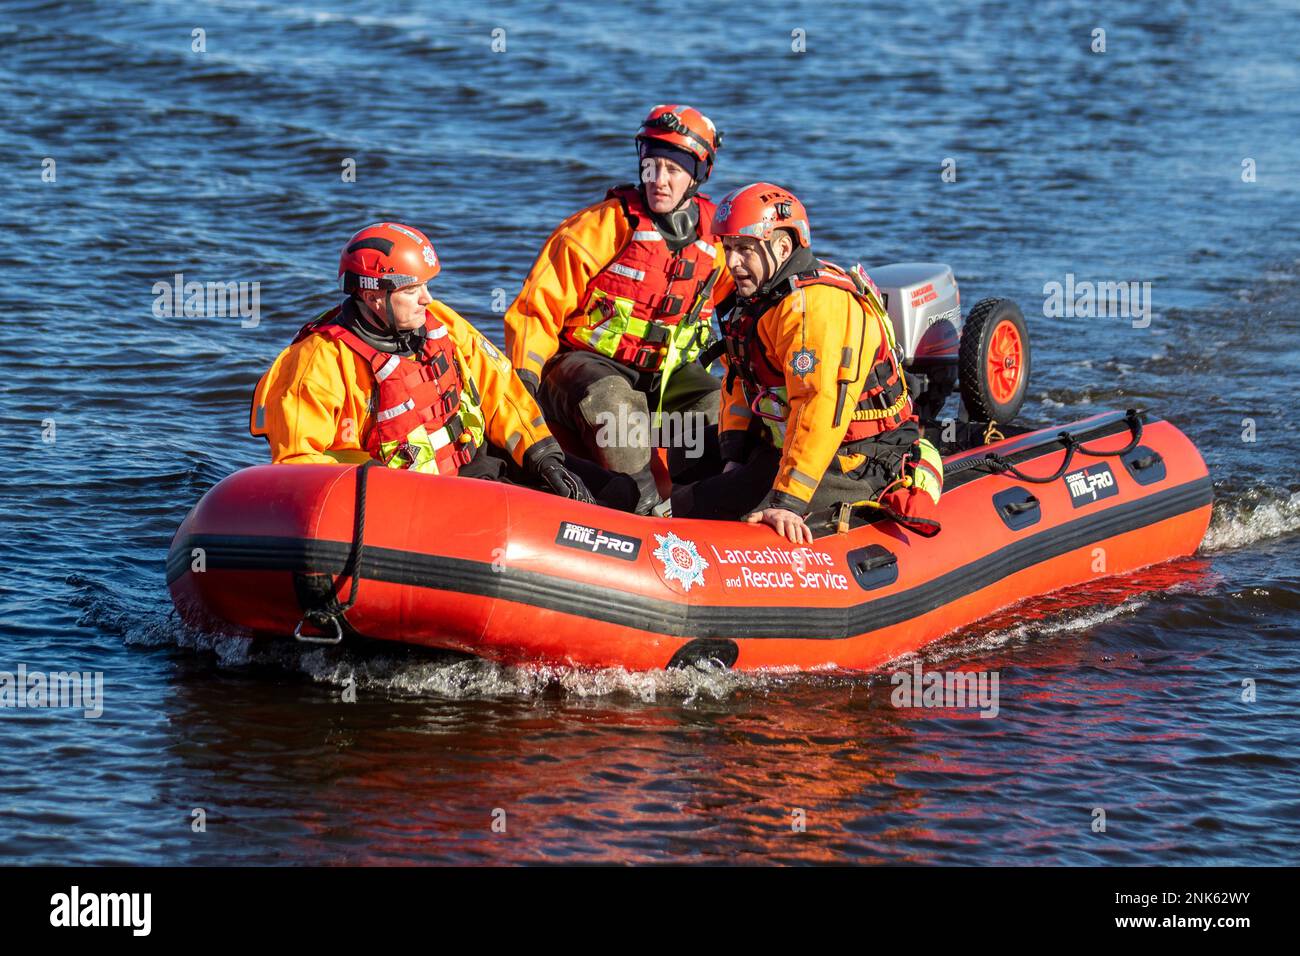 Lancashire Fire and Emergency Rescue Team on a training day at Maritime Way, Preston Docks. The full-time Fire Crew who work 2 days on, & 2 nights on per week, practice and hone their skills by launching a Zodiac MILPRO Rib boat at Preston Docks, Riversway, UK Stock Photo